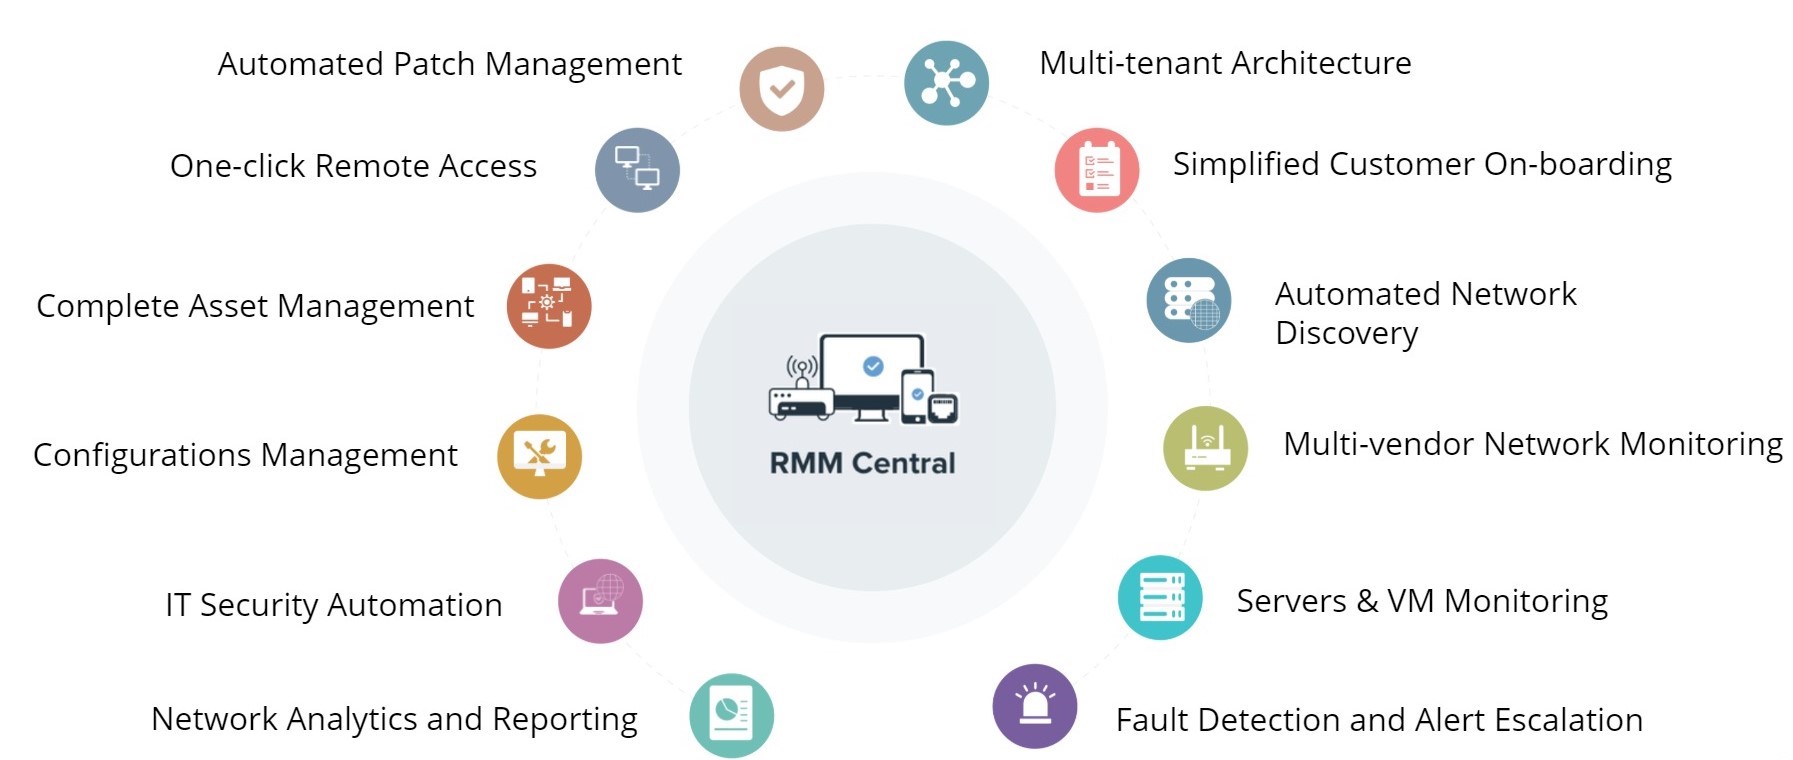 ManageEngine RMM Central's features for Managed IT Services